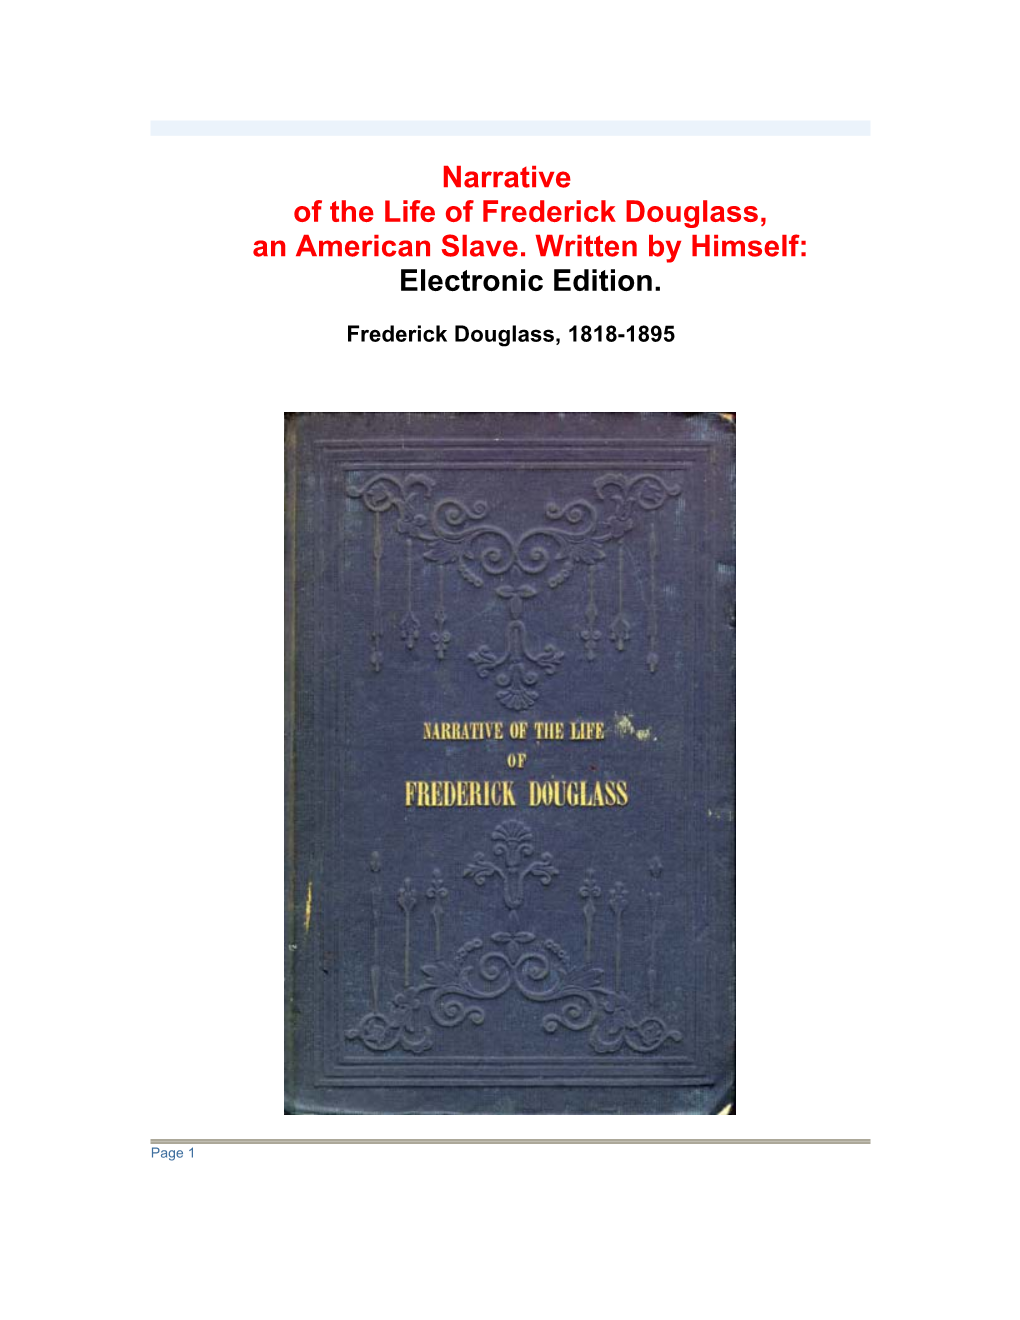 Narrative of the Life of Frederick Douglass, an American Slave. Written by Himself: Electronic